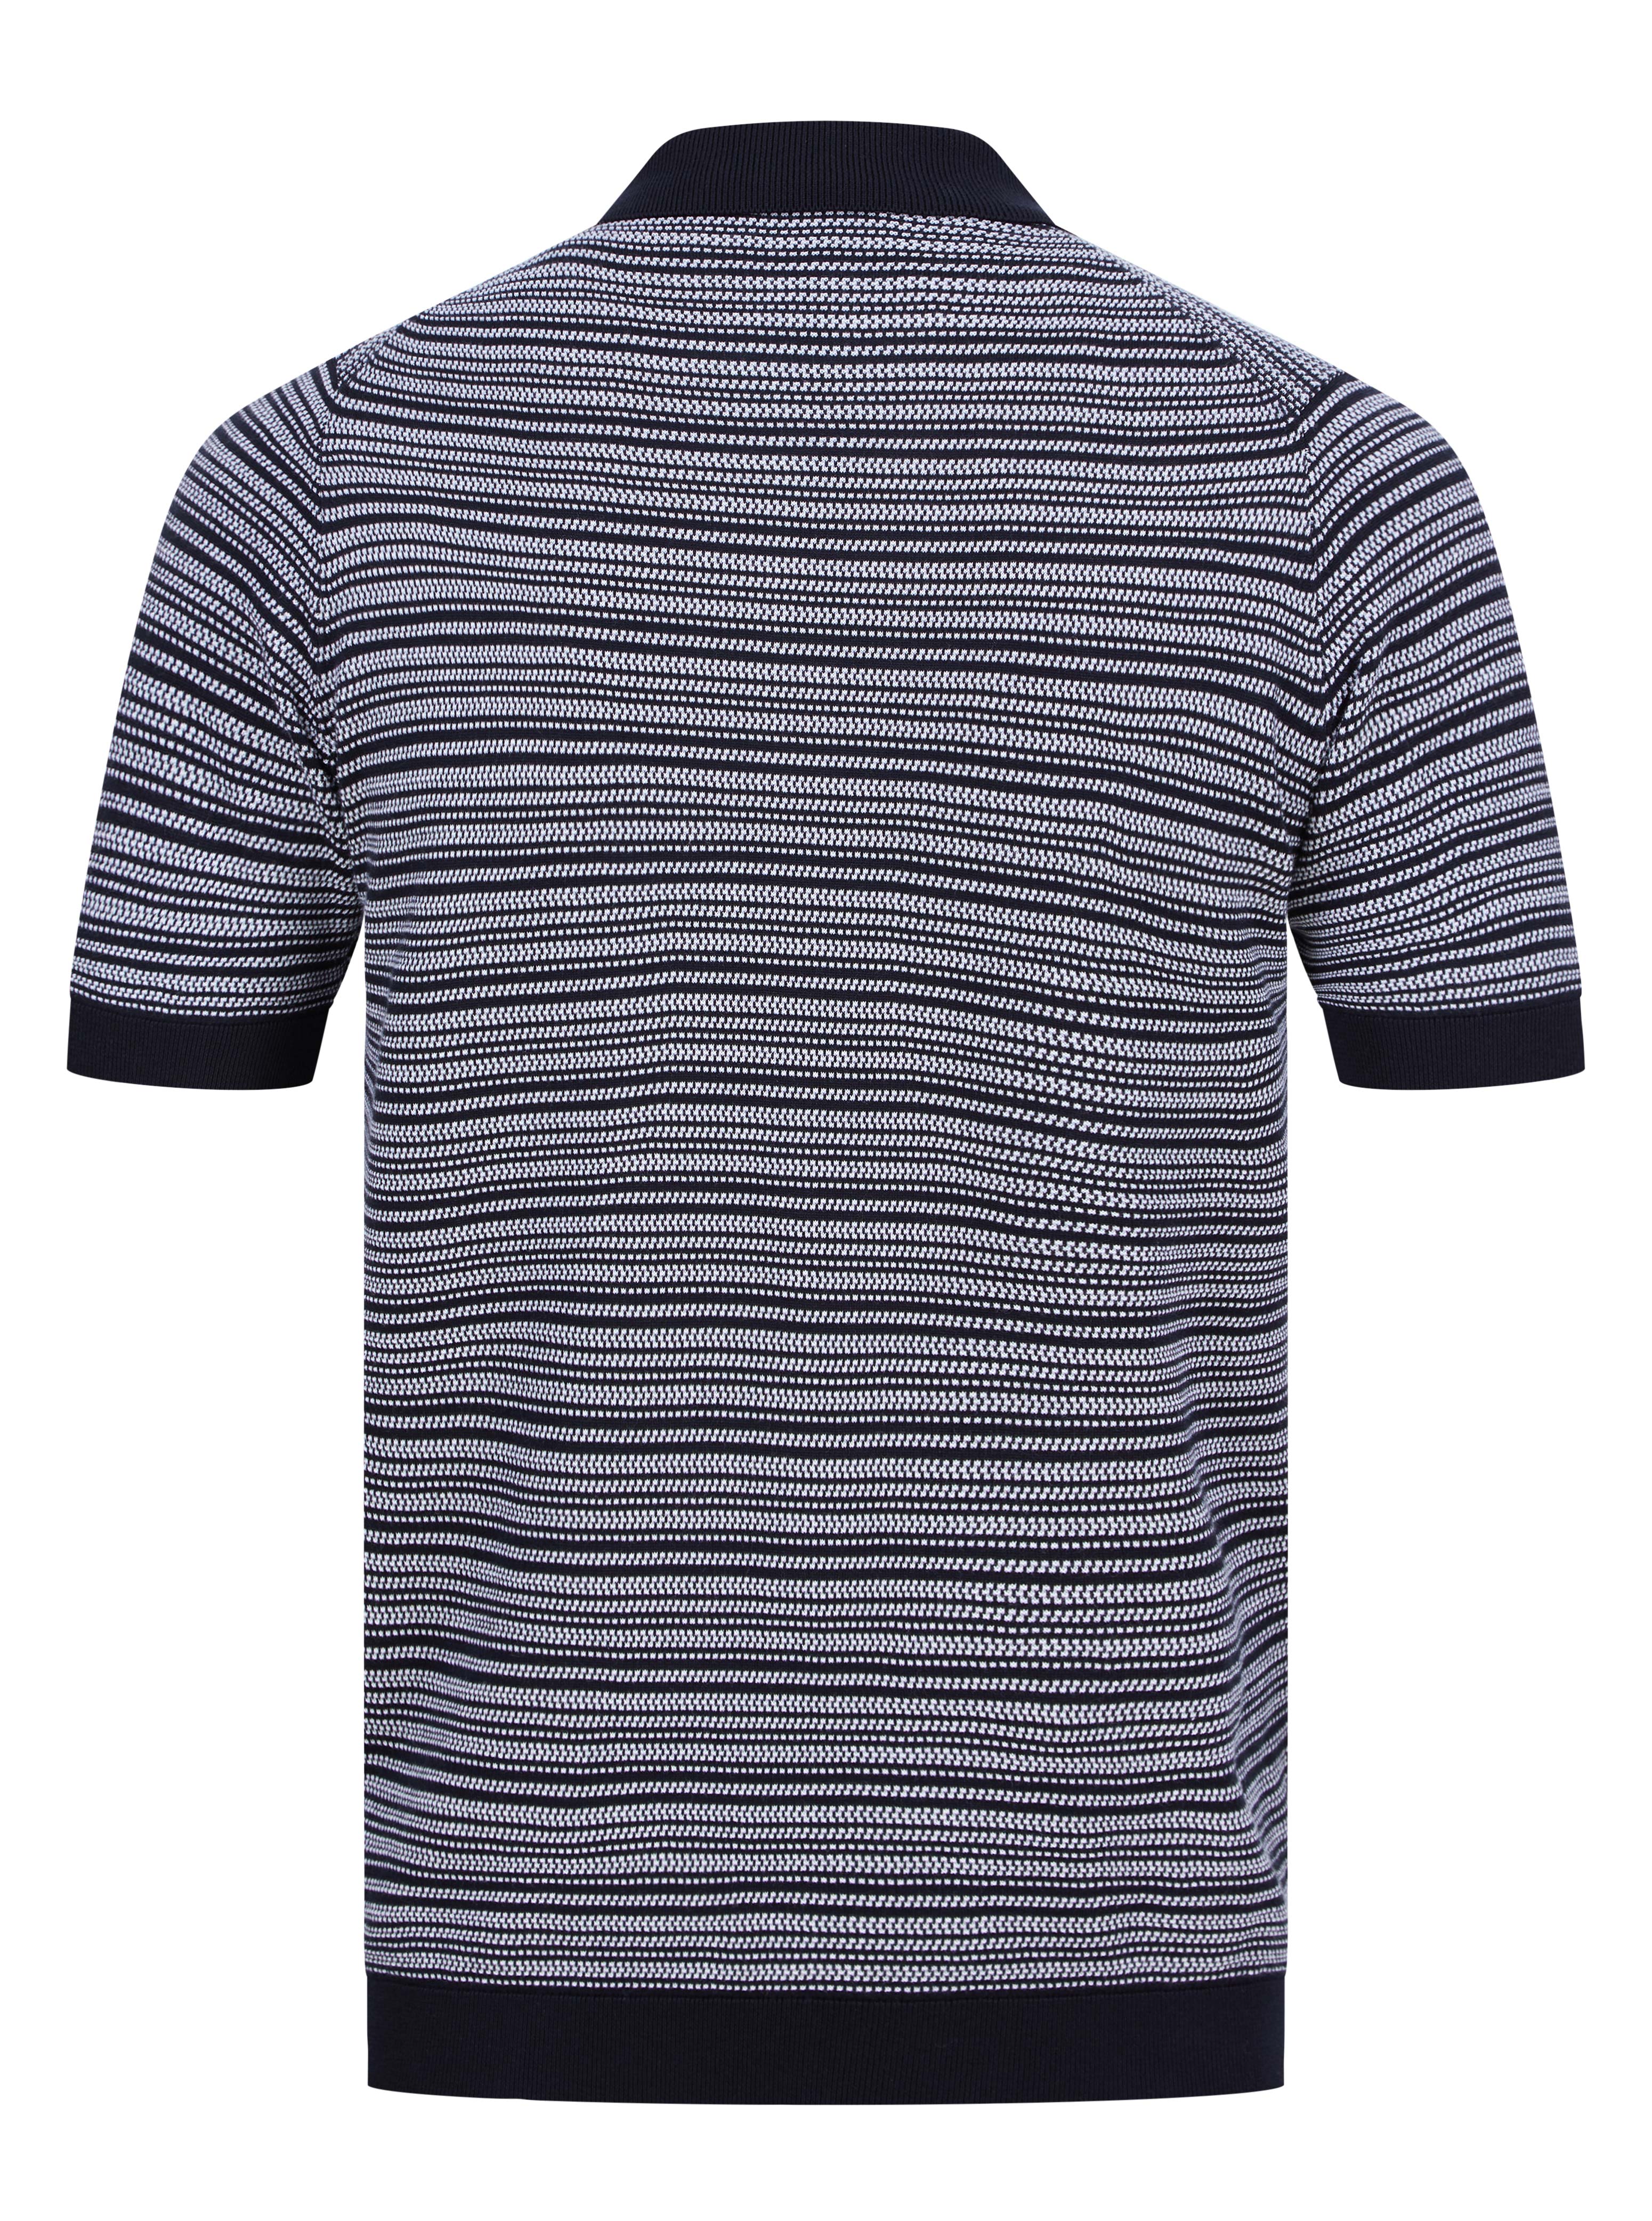 Load image into Gallery viewer, John Smedley Chuck Jaquard Polo Navy
